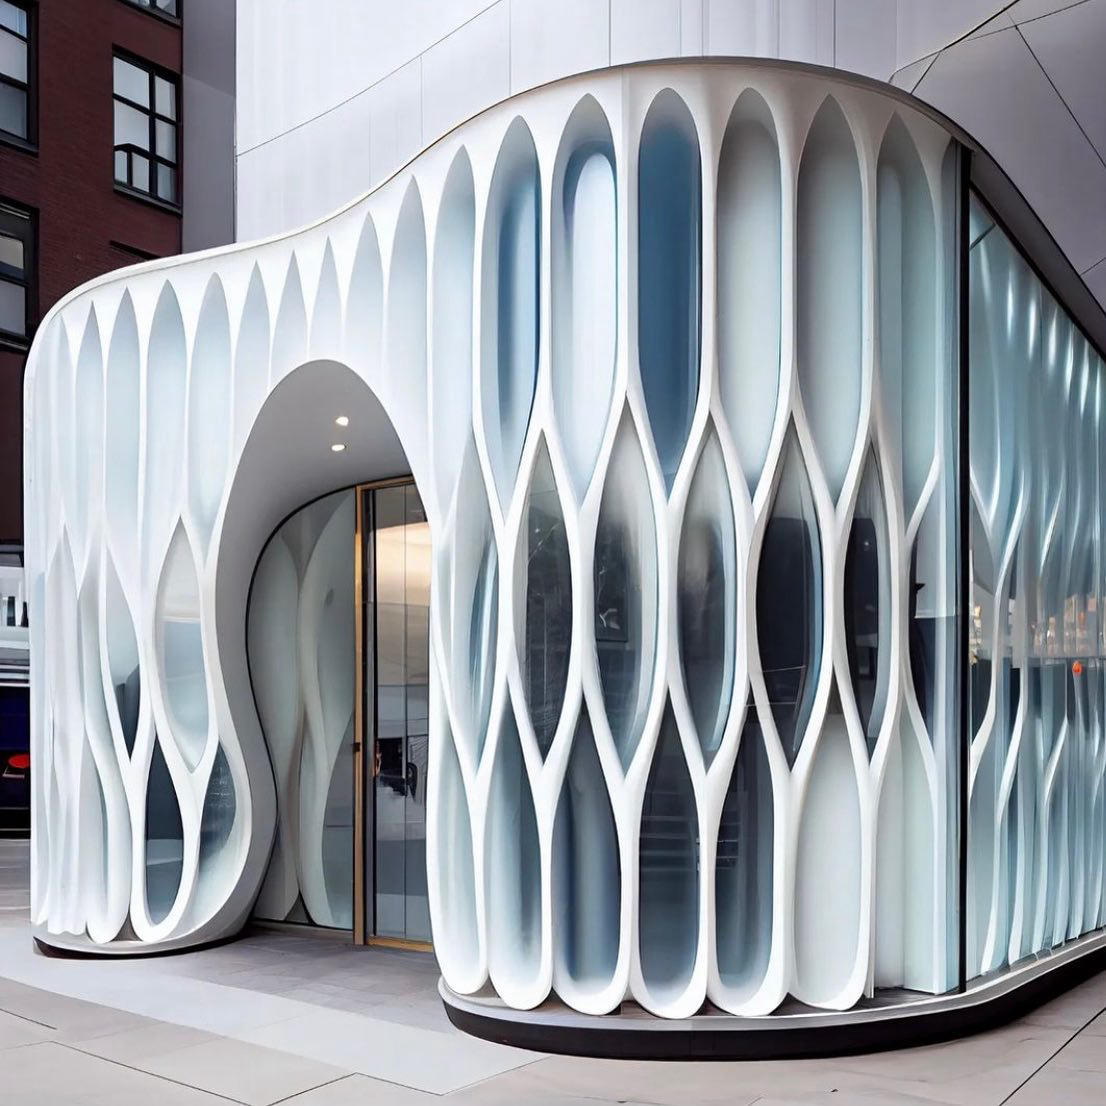 Arc.Only - What do you think about this facade